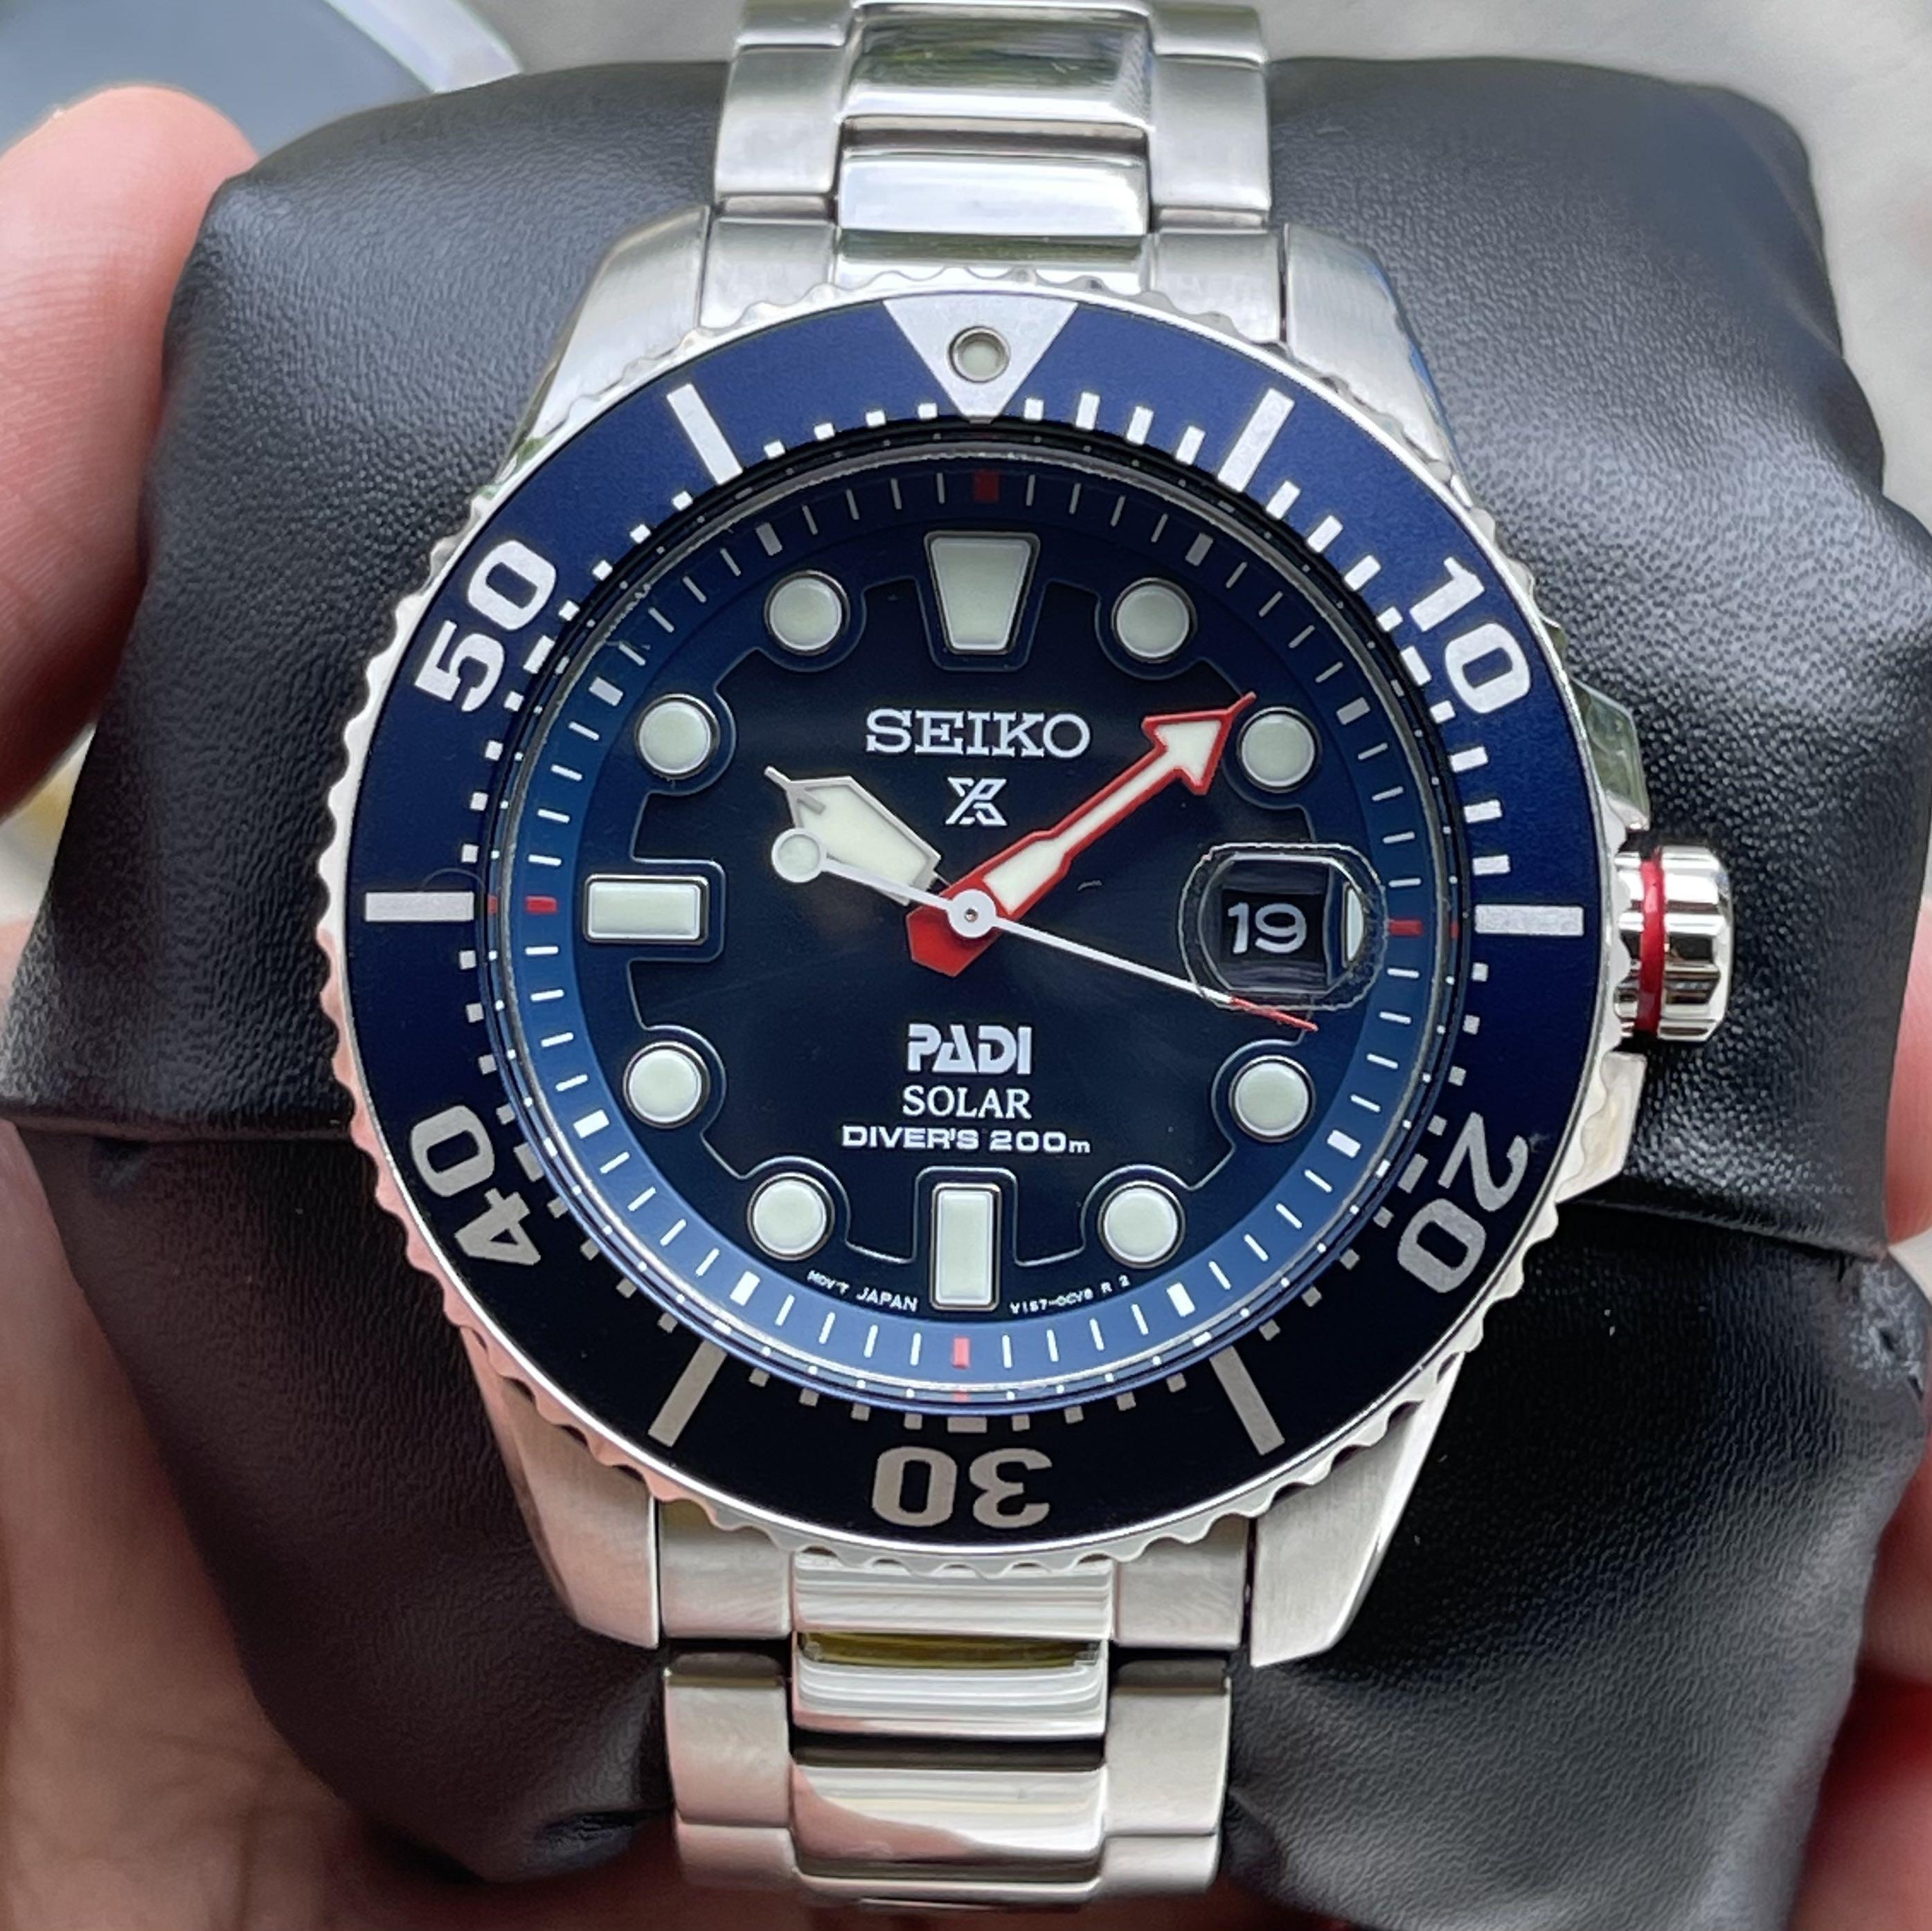 Seiko Prospex PADI Edition Solar Powered ISO Rated Diver's 200m Dive Watch  in Blue SNE435P1 SNE435 Full Box in Great Condition!, Men's Fashion,  Watches & Accessories, Watches on Carousell